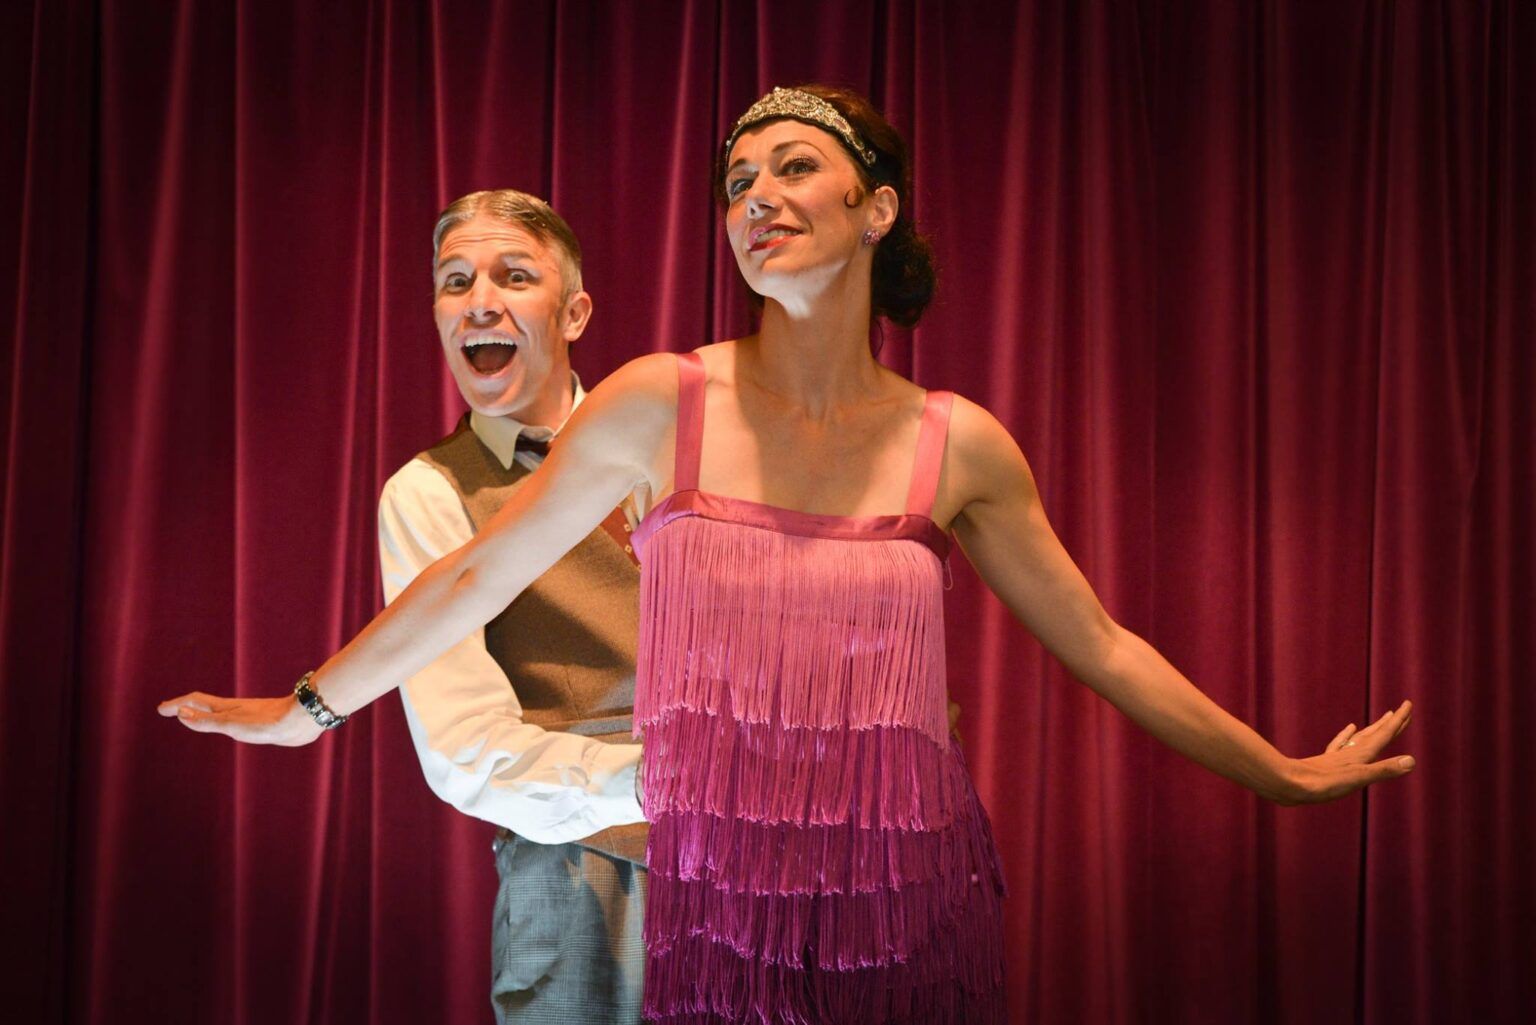 A man and a woman are dancing on a stage in front of a red curtain. The woman is wearing a pink 19202 fringed dress.